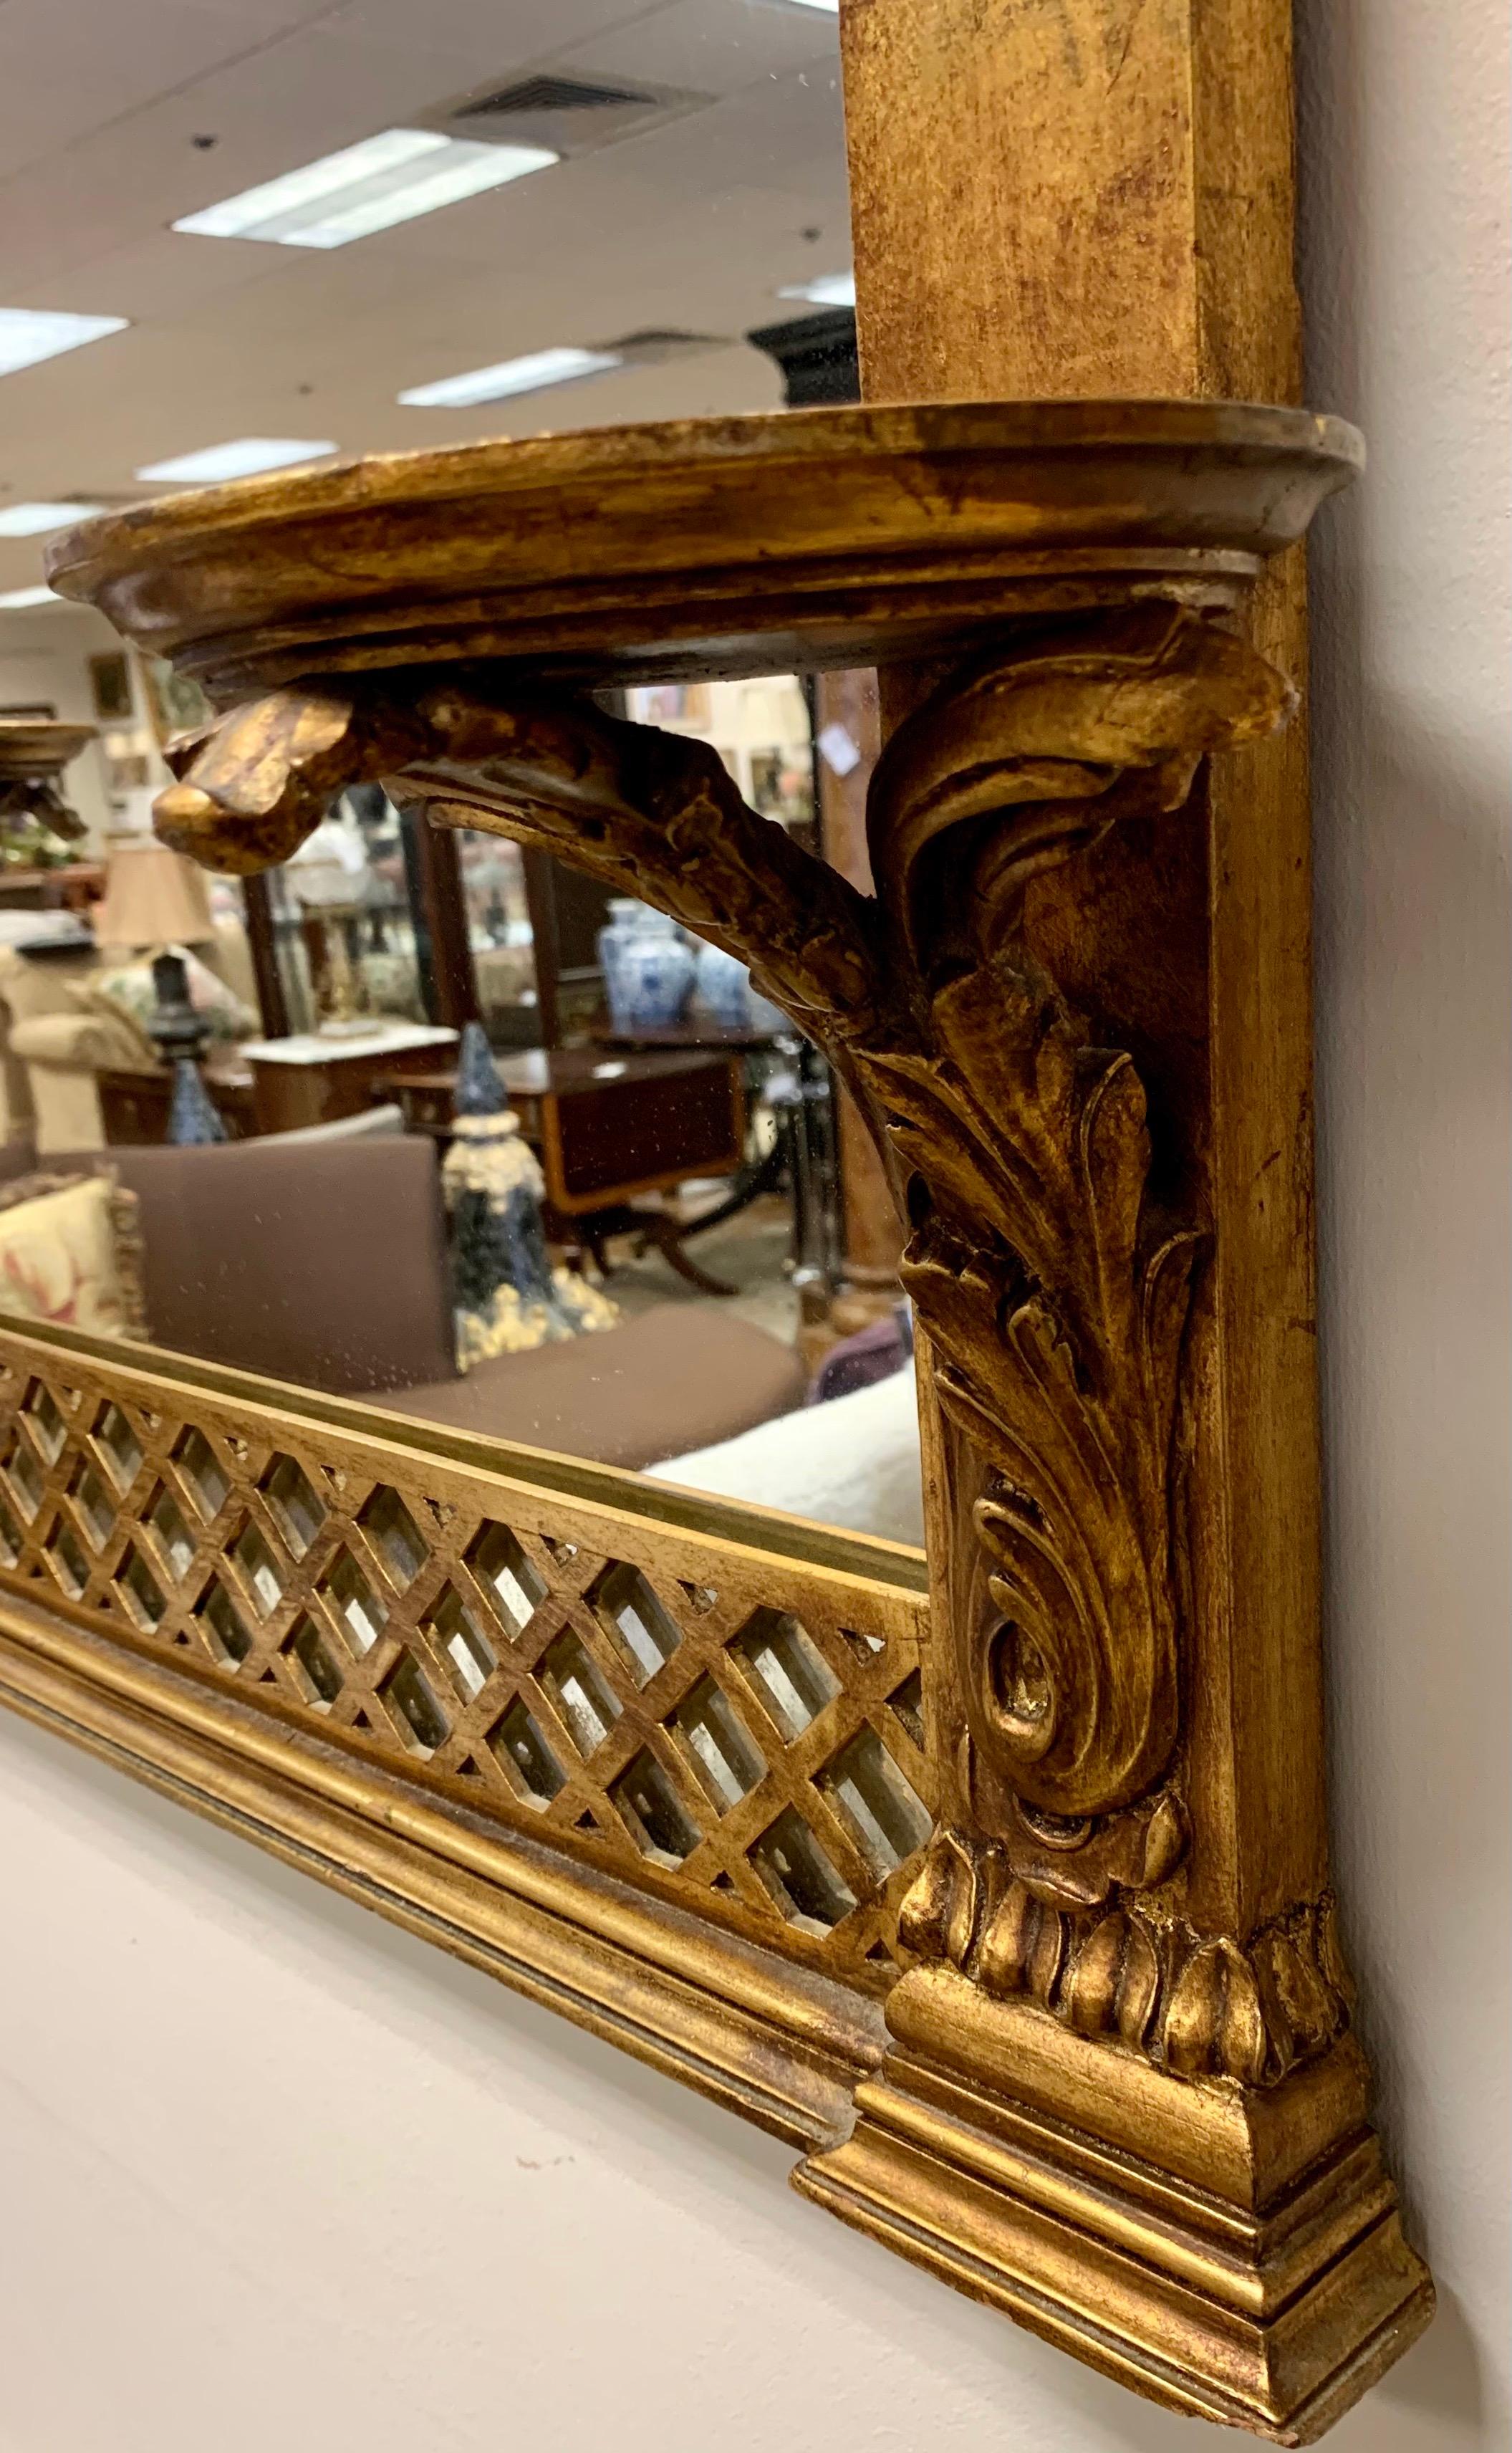 19th century Louis XVI period Italian mirror with crest featuring a medallion with swags and arrows. Bottom portion of mirror has ornately carved wall brackets on each side.